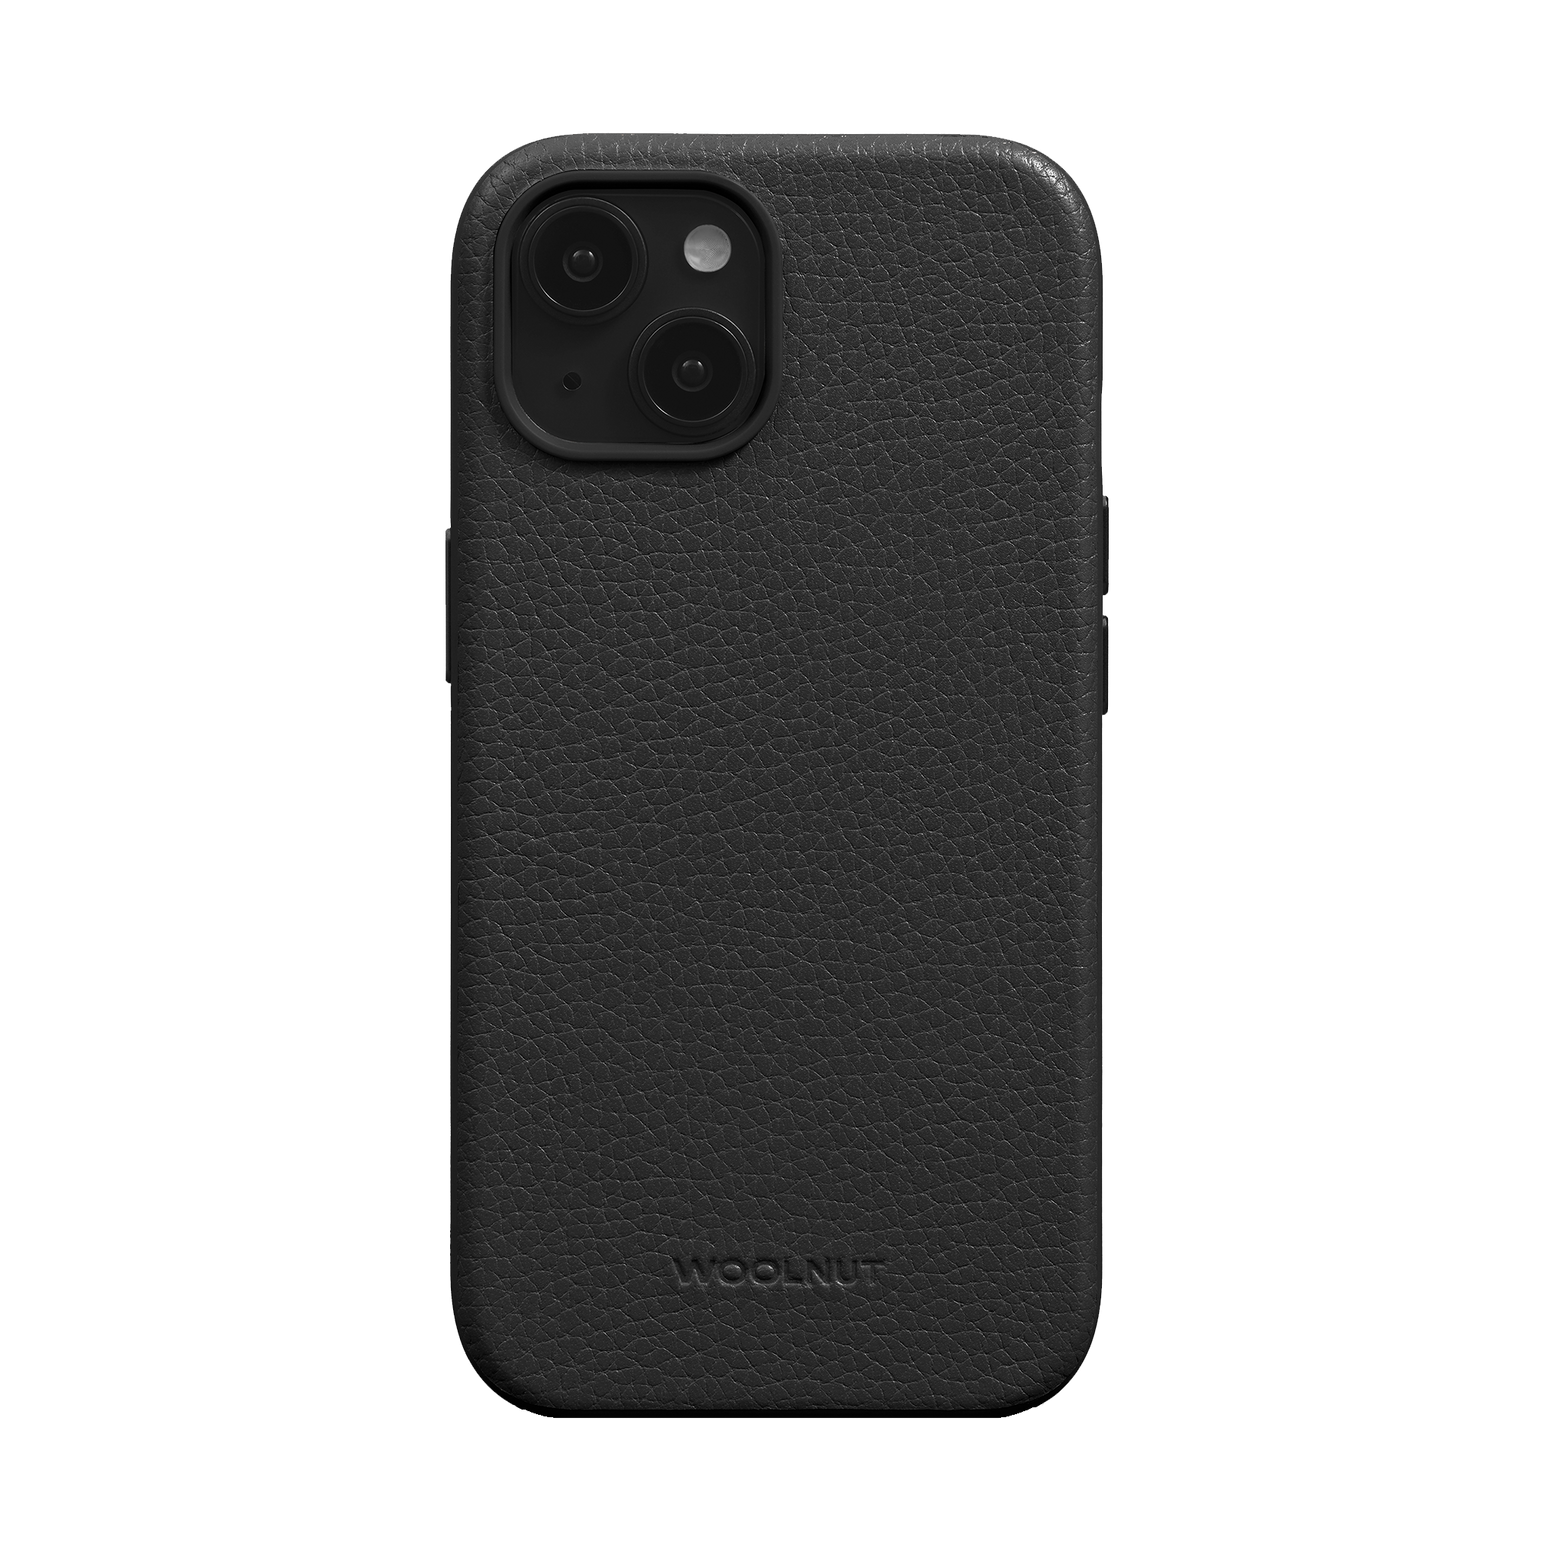 WOOLNUT Leather Case for iPhone 15 - Black